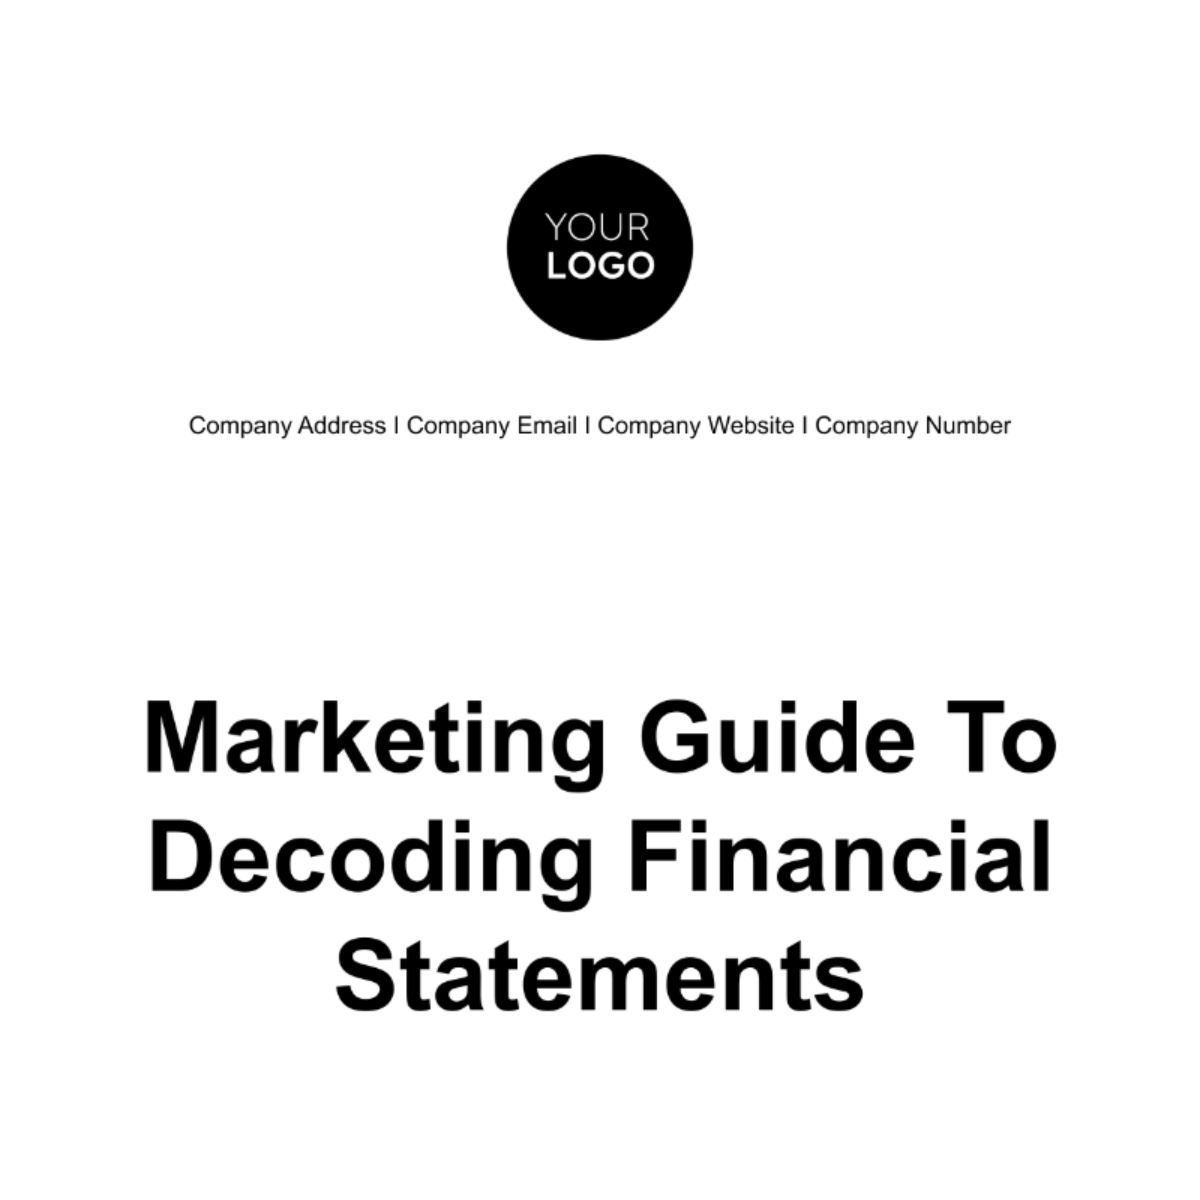 Marketing Guide to Decoding Financial Statements Template